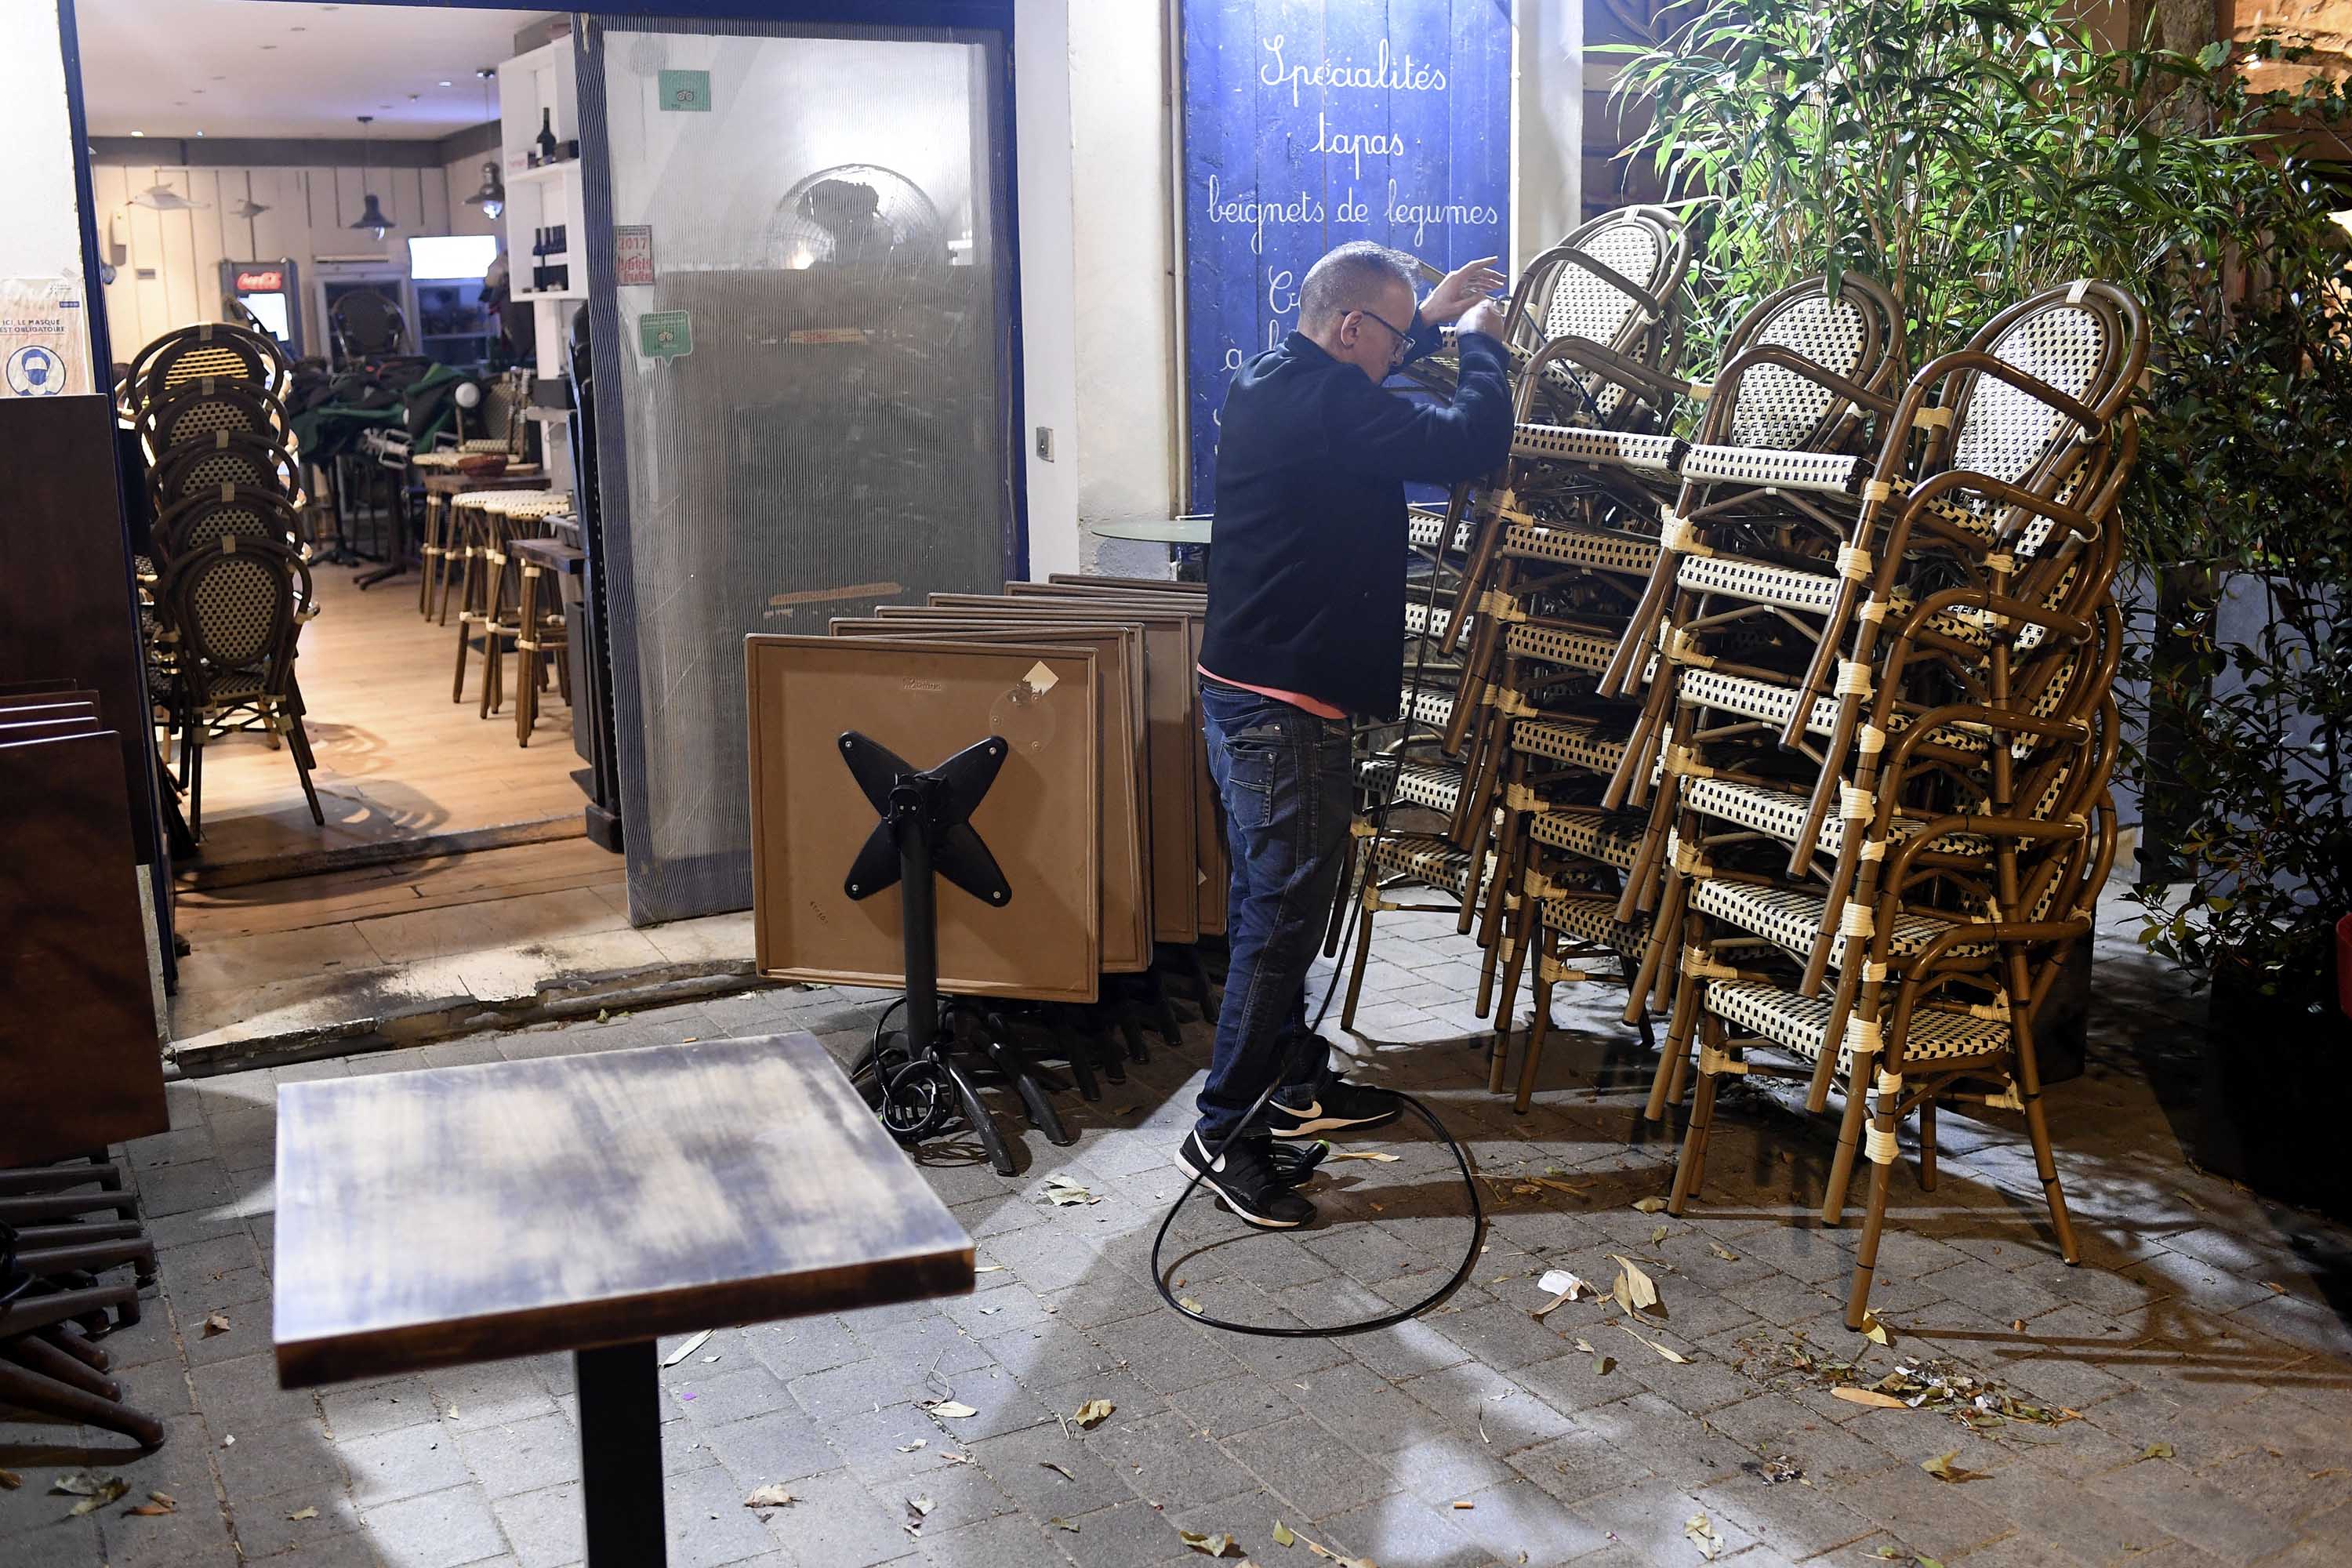 A restaurant owner removes chairs and tables on a terrace in Marseille on September 27, as the city closes for seven days due to the coronavirus outbreak.